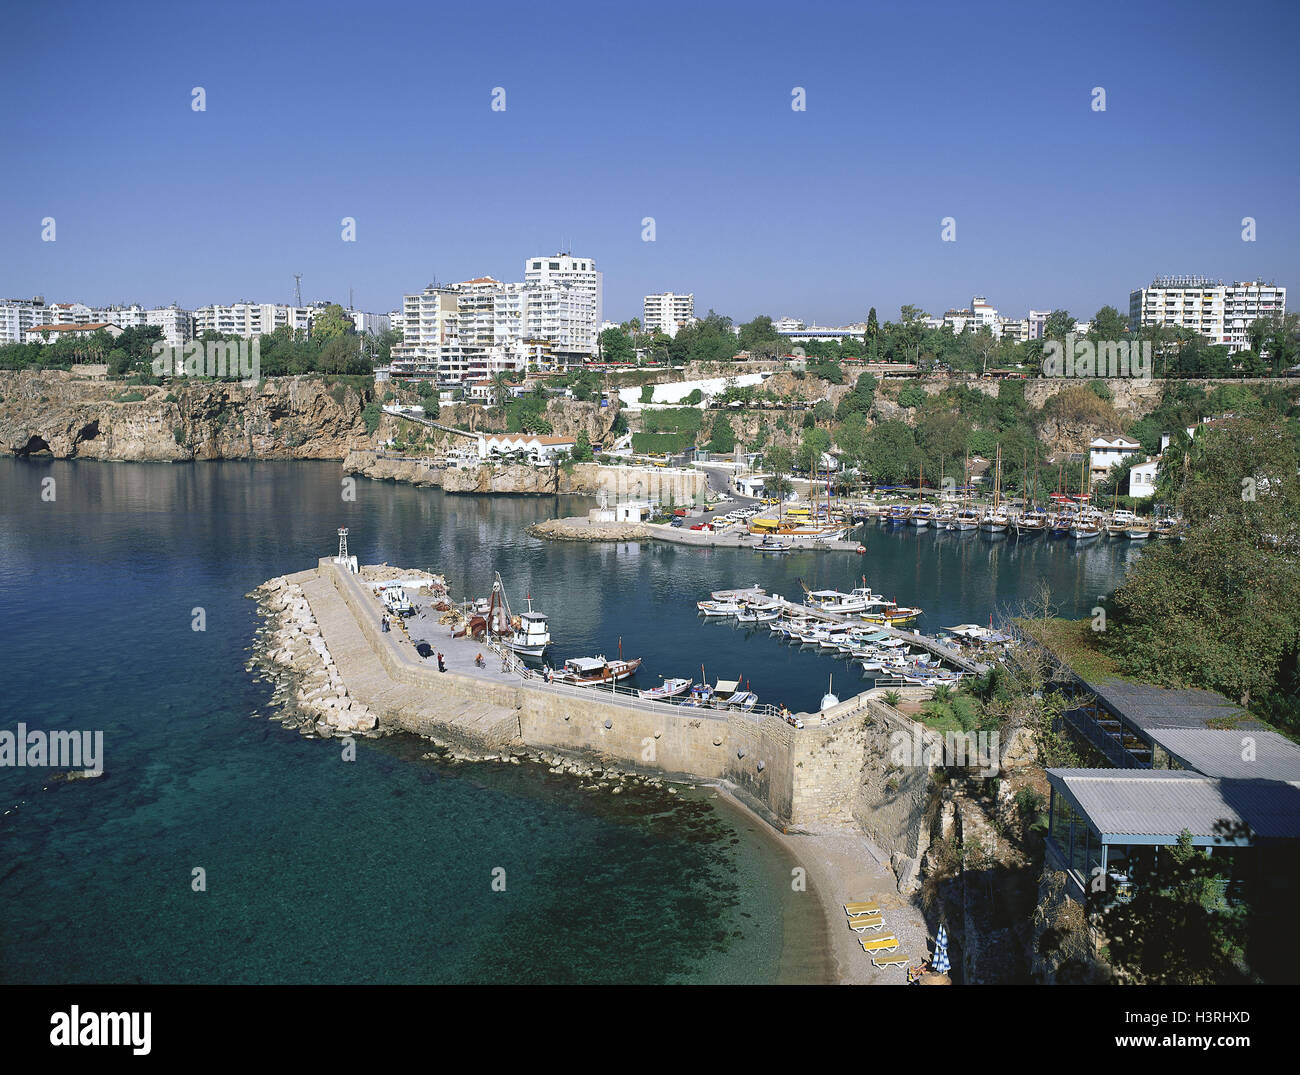 Turkey, Antalya, town view, yacht harbour in the Vgr. Stock Photo